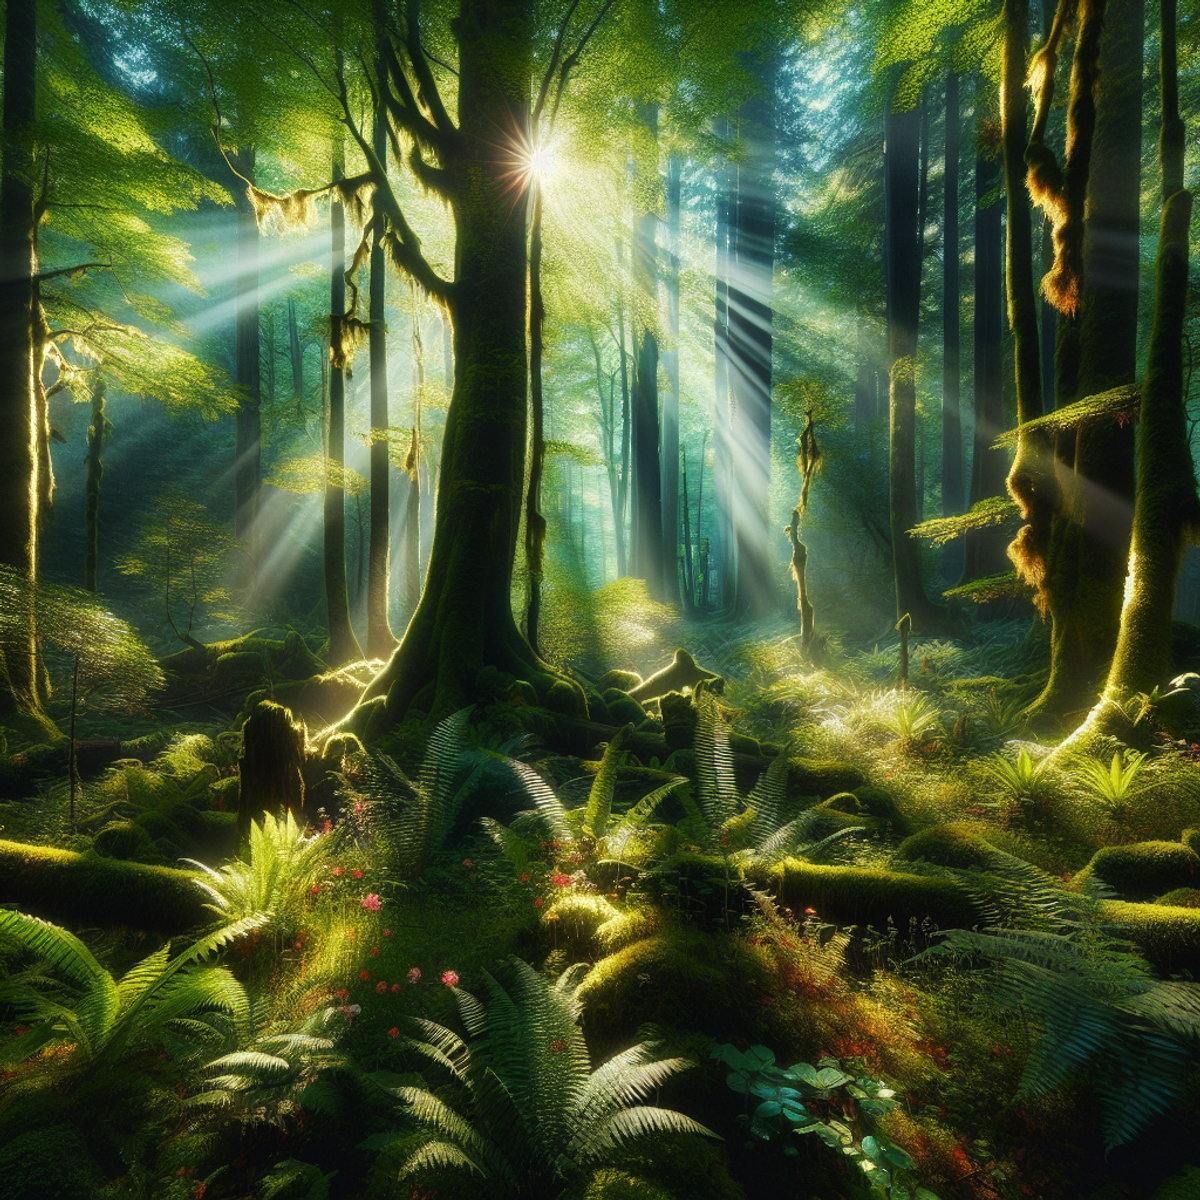 A lush, verdant forest with sunlight filtering through the canopy, creating a magical and ethereal atmosphere. Tall trees, ferns, mosses, and wildflowers adorn the forest floor.